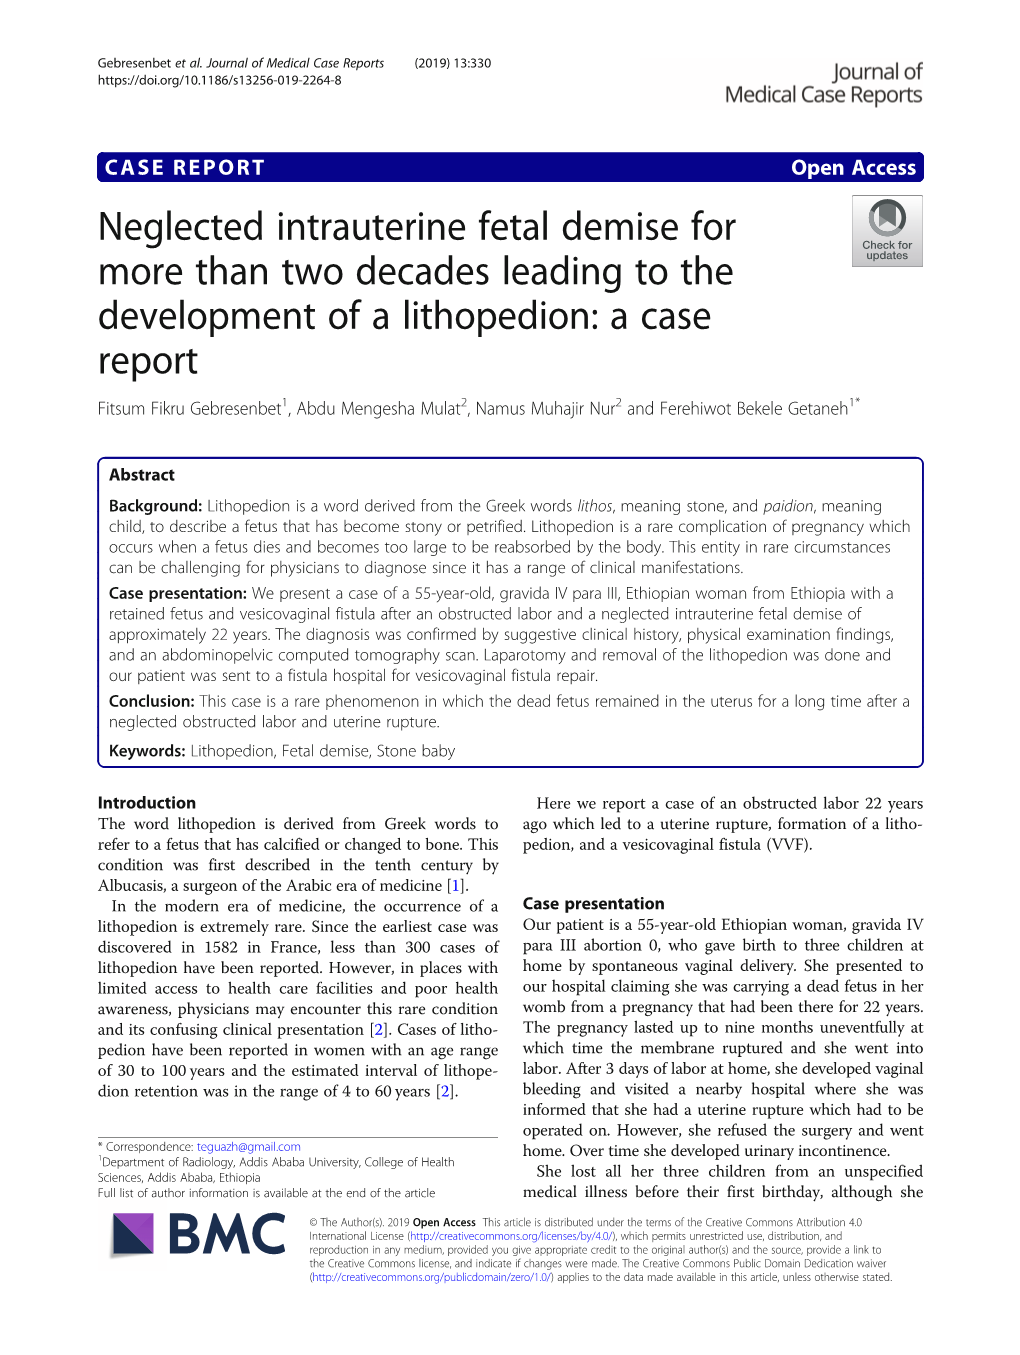 Neglected Intrauterine Fetal Demise for More Than Two Decades Leading To